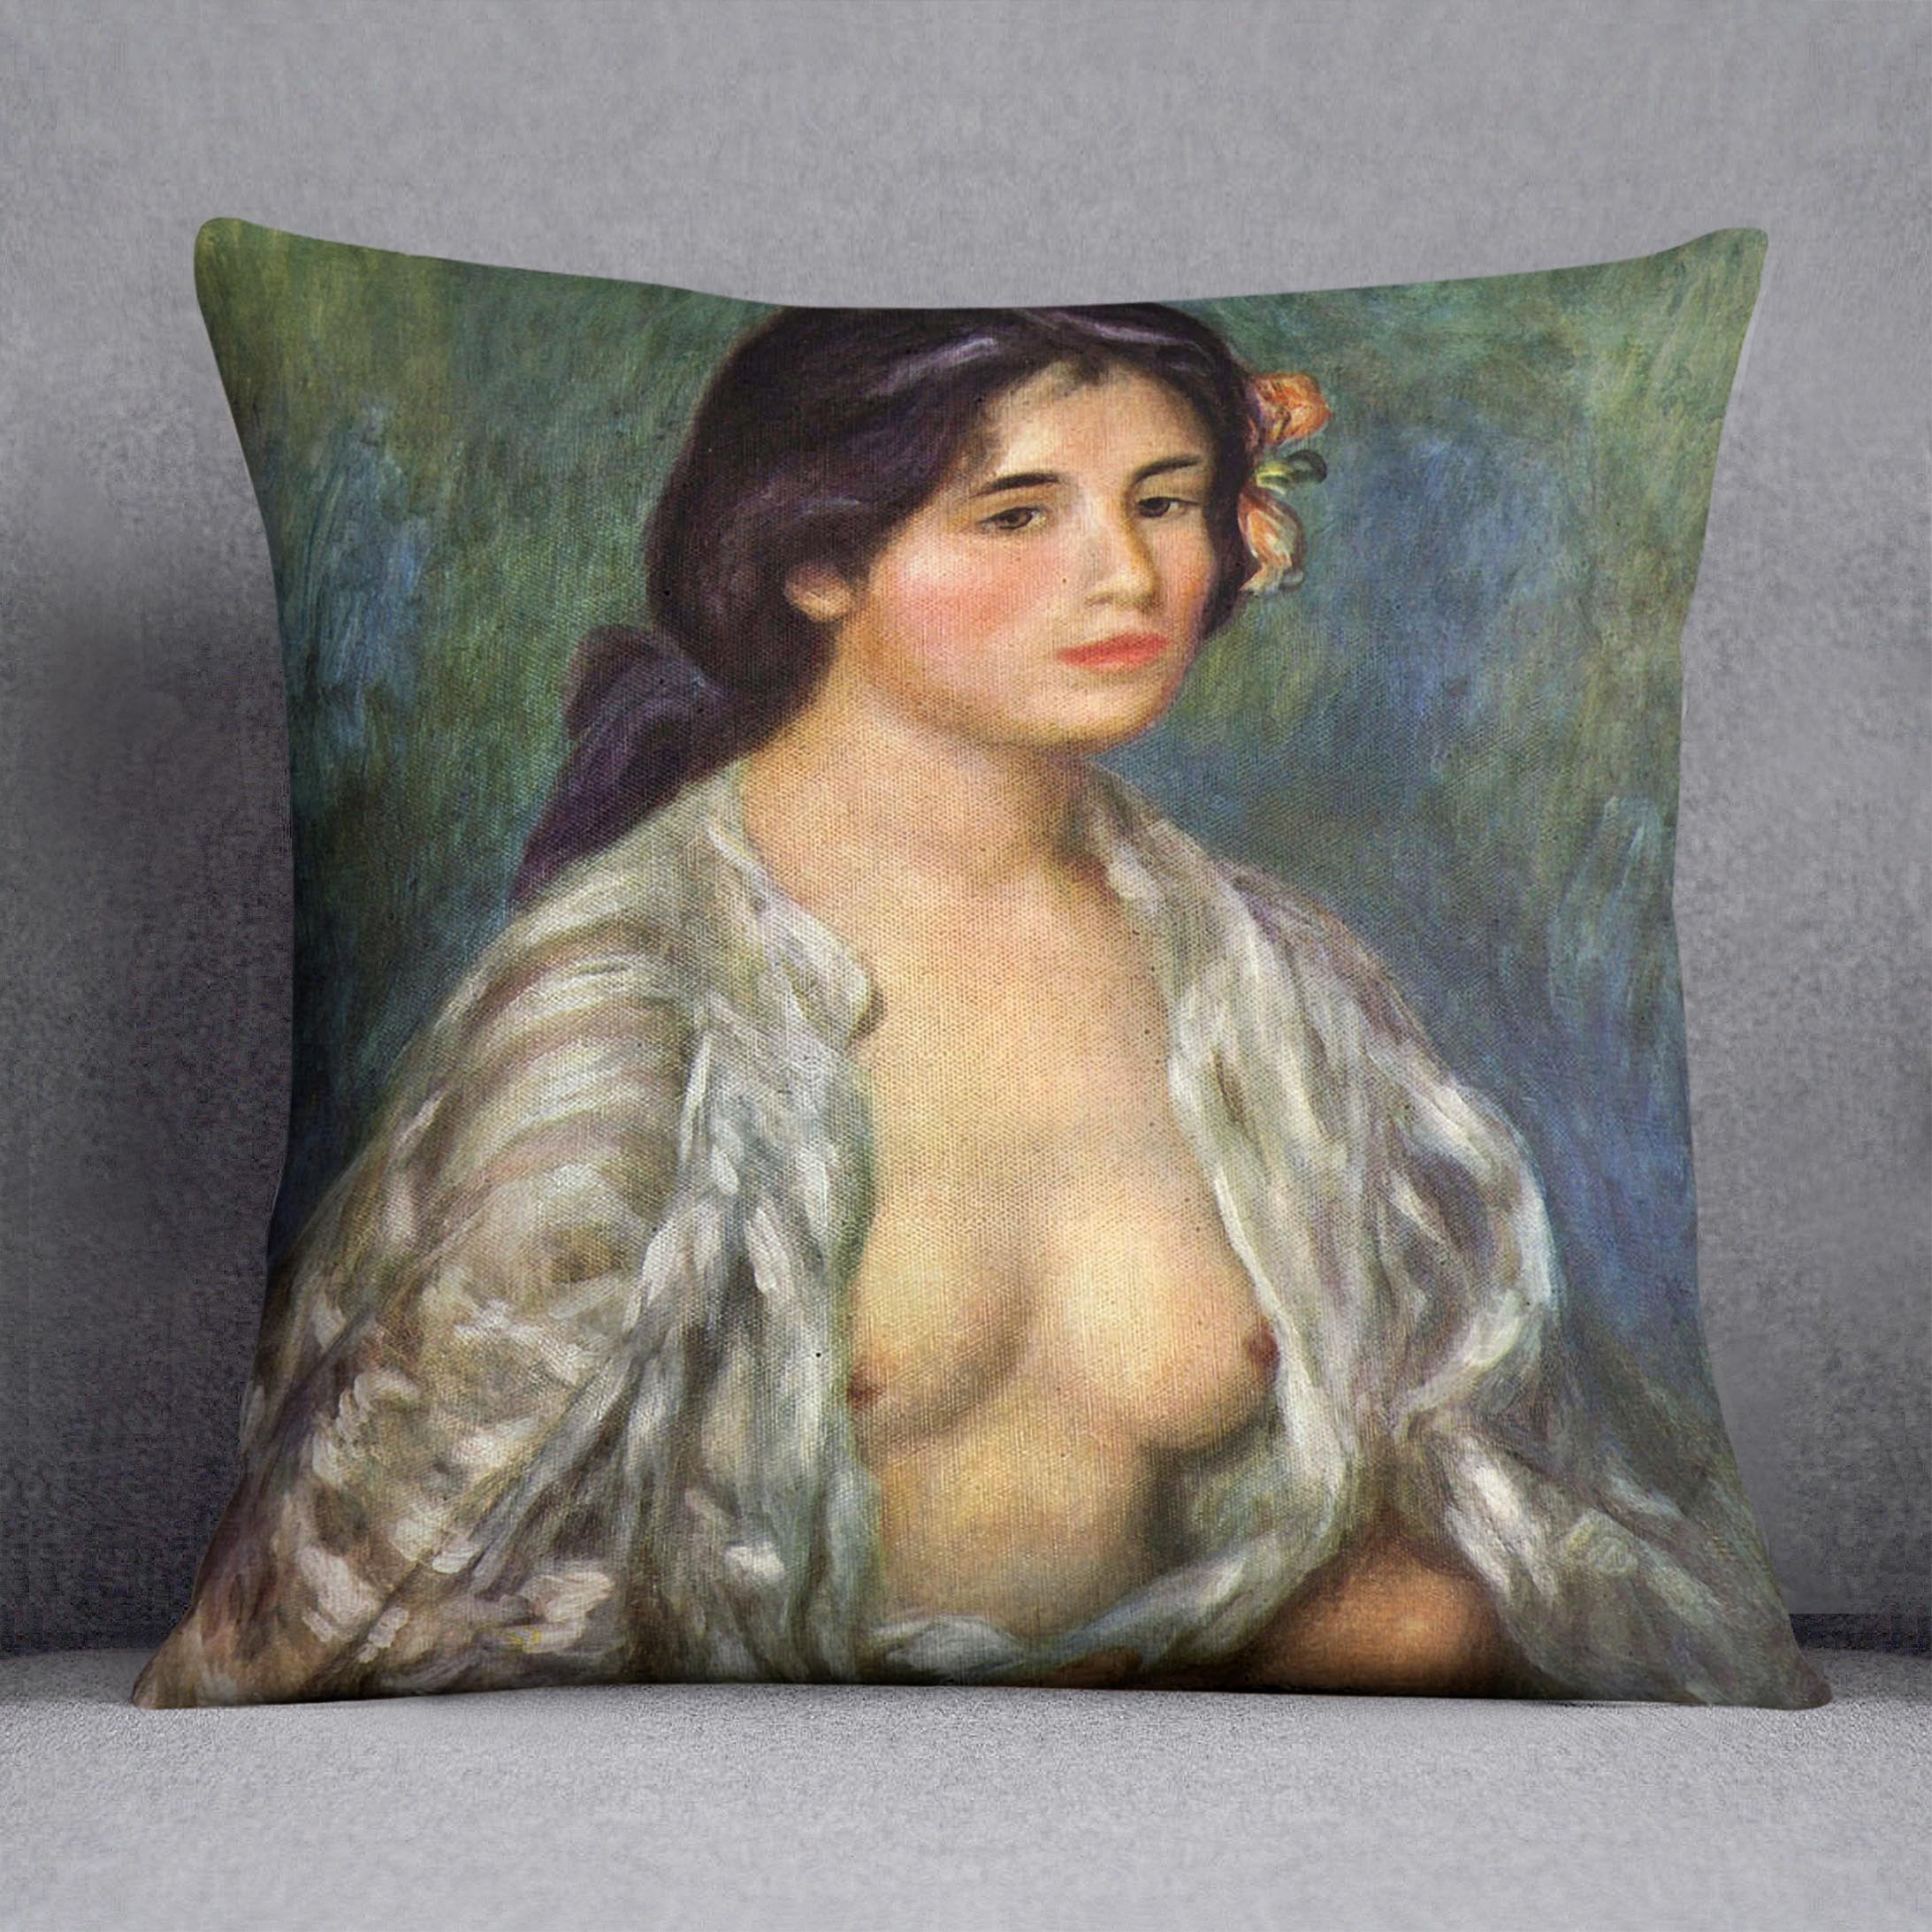 Gabrielle with open blouse by Renoir Throw Pillow